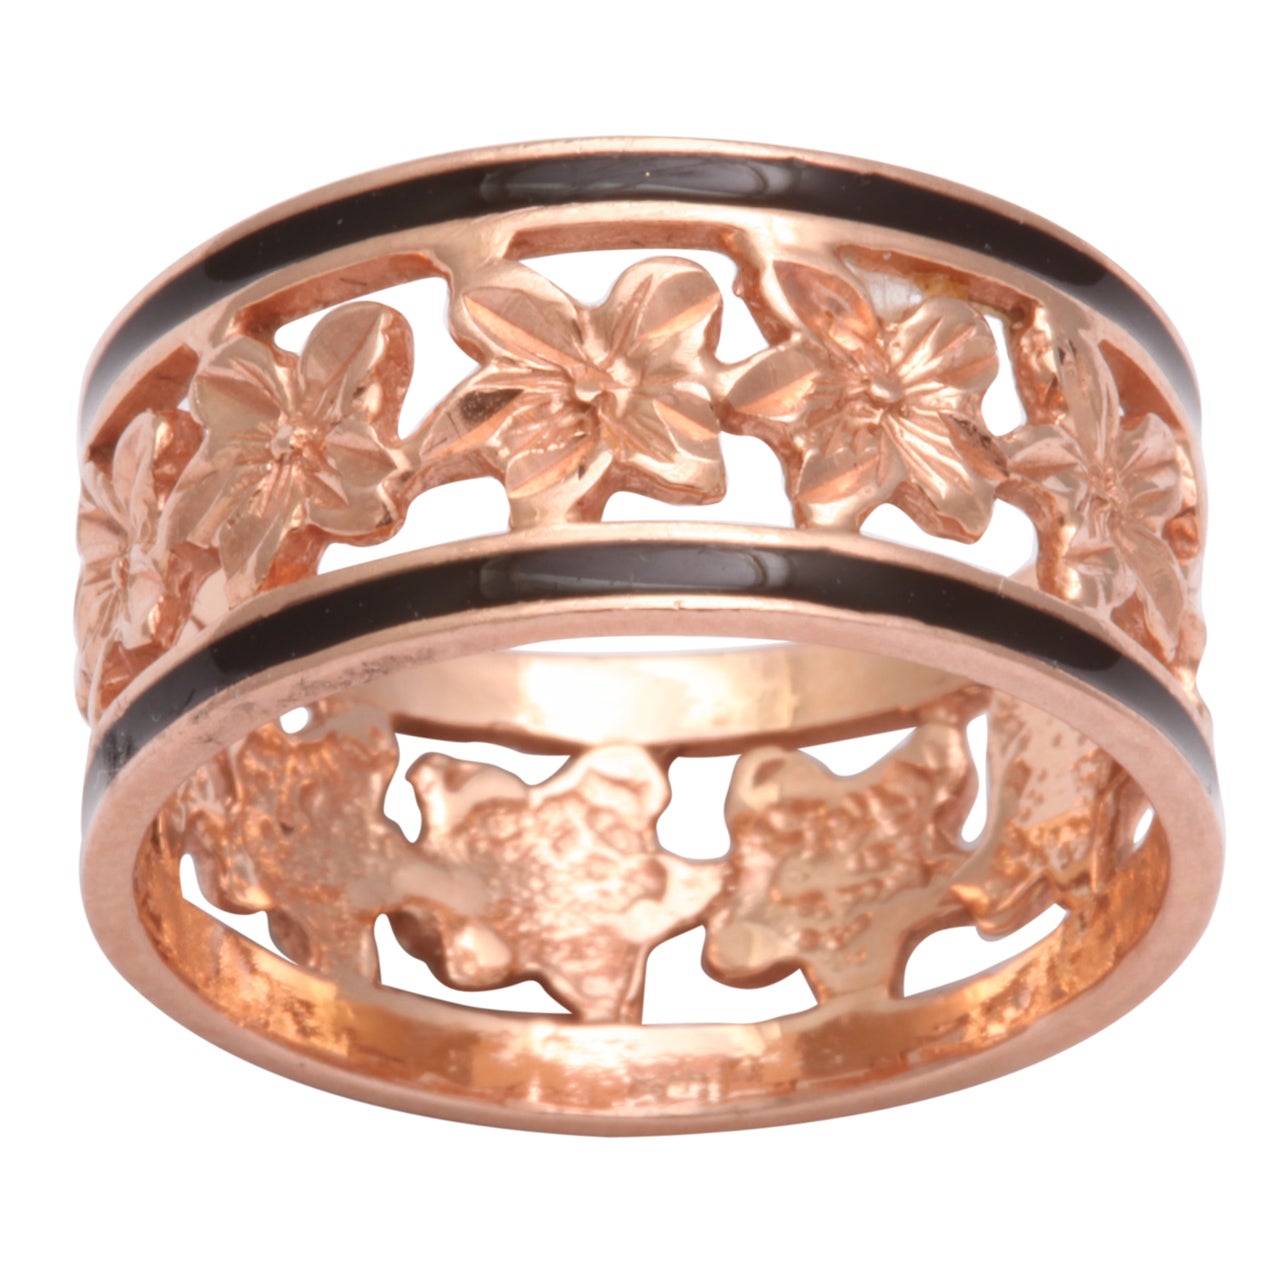 14 Karat Gold Wedding Band with Ivy Leaves and Enamel, circa 1870 For Sale